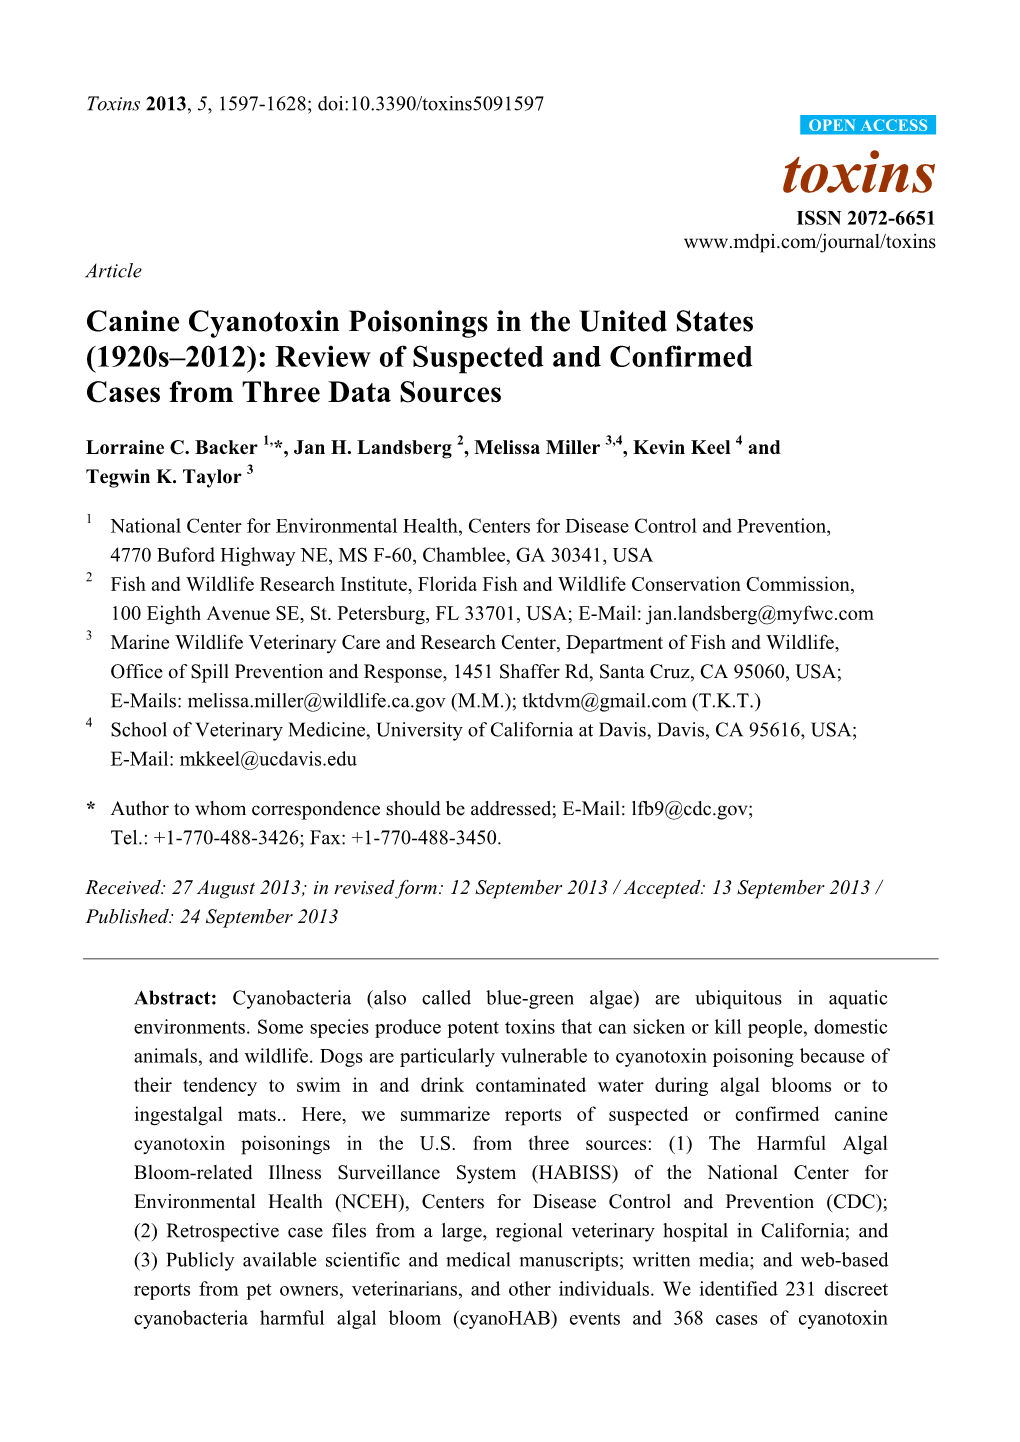 Canine Cyanotoxin Poisonings in the United States (1920S–2012): Review of Suspected and Confirmed Cases from Three Data Sources